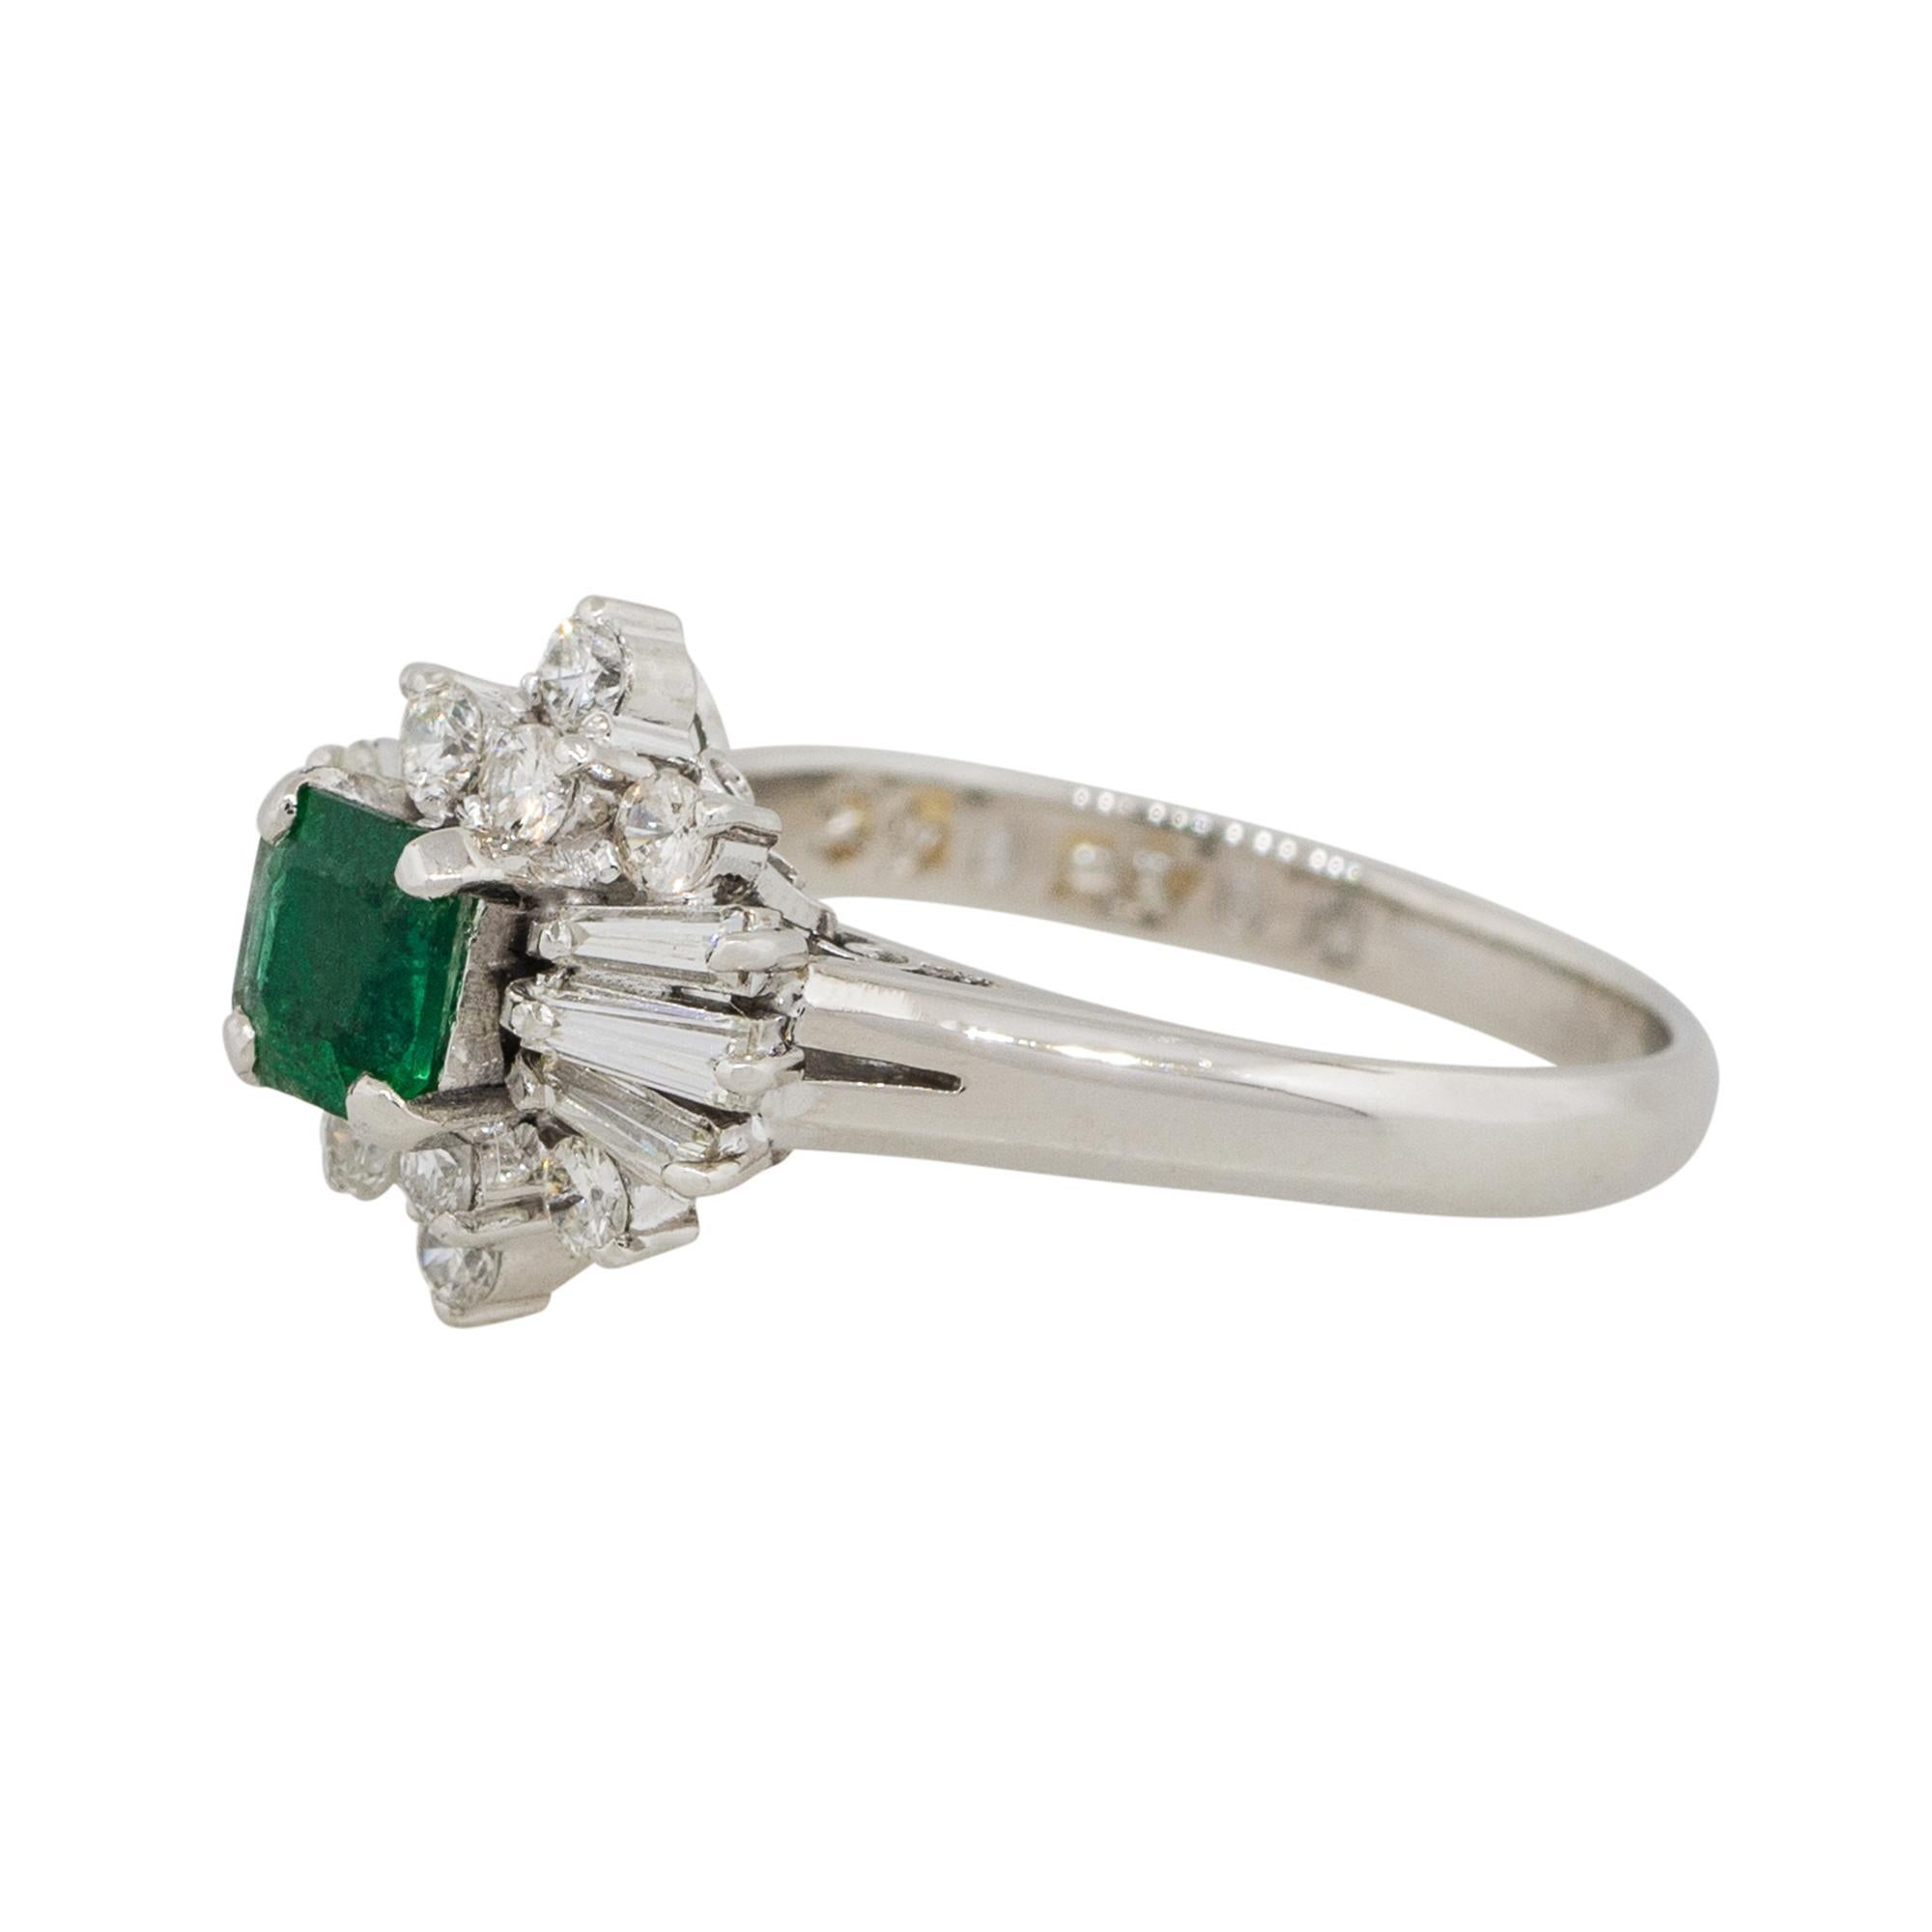 Material: Platinum
Gemstone details: Approx. 0.43ctw square shaped Emerald center gemstone
Diamond details: Approx. 0.56ctw of round and baguette cut Diamonds. Diamonds are G/H in color and VS in clarity
Ring Size: 6   
Ring Measurements: 0.75